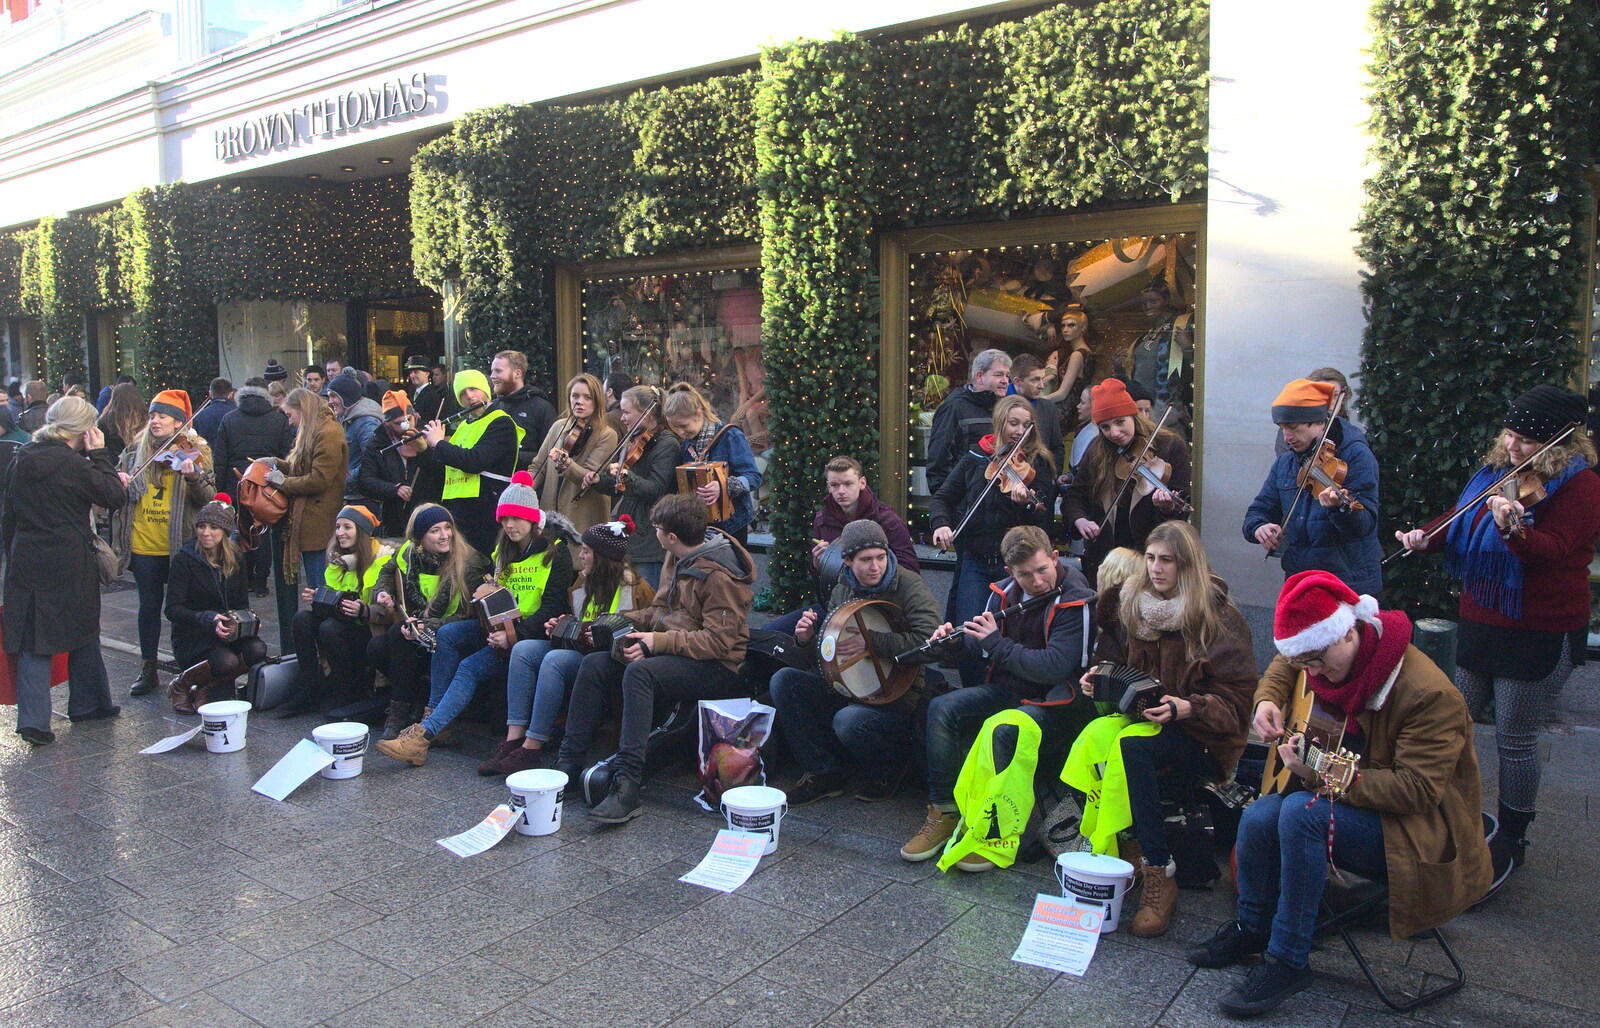 There's a massive trad session going on outside Brown Thomas from Christmas Eve in Dublin and Blackrock, Ireland - 24th December 2015